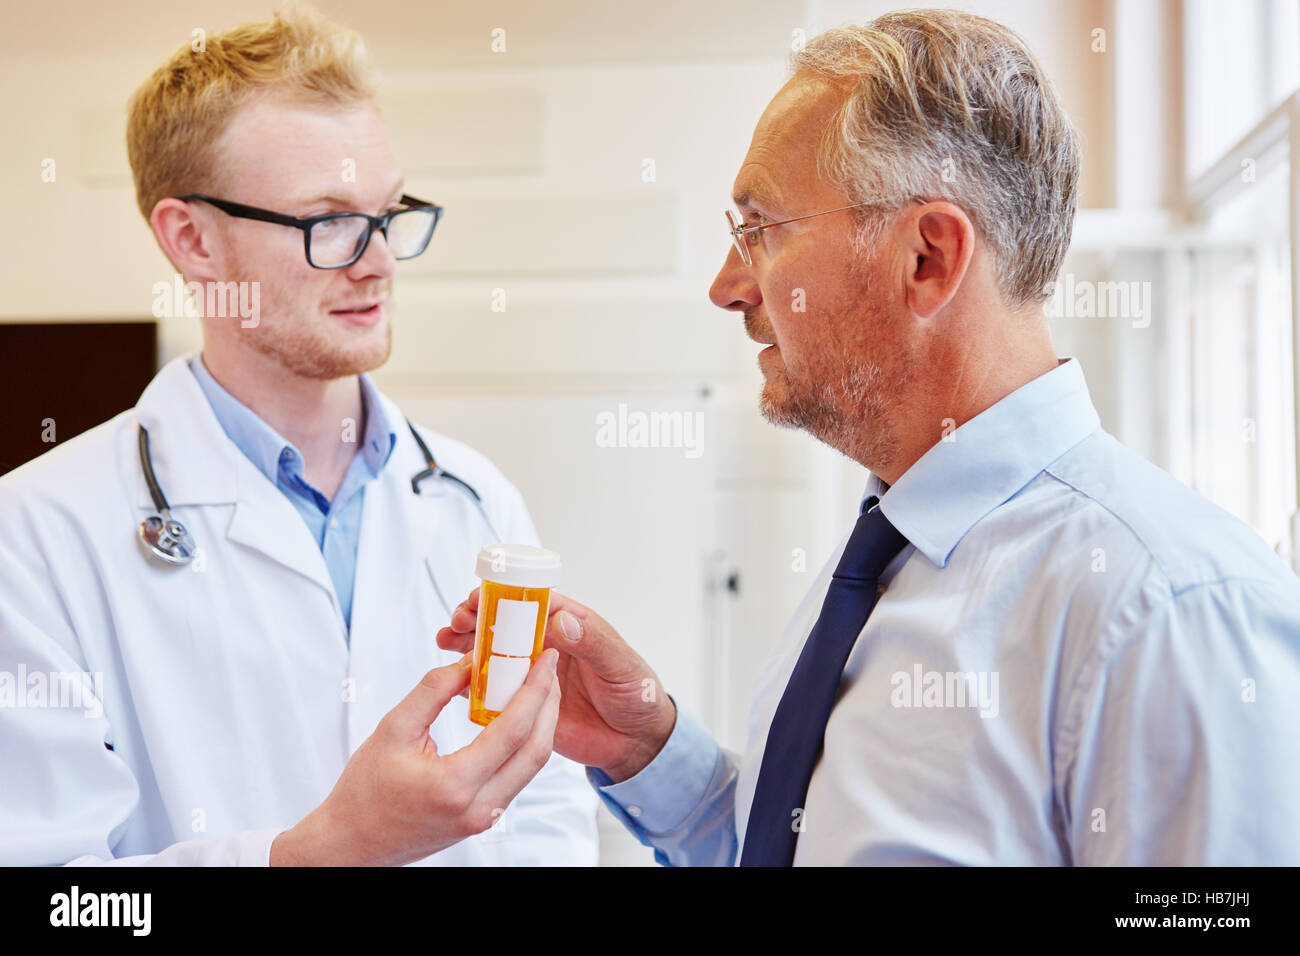 Doctor or physician gives painkiller to patient for further treatment Stock Photo